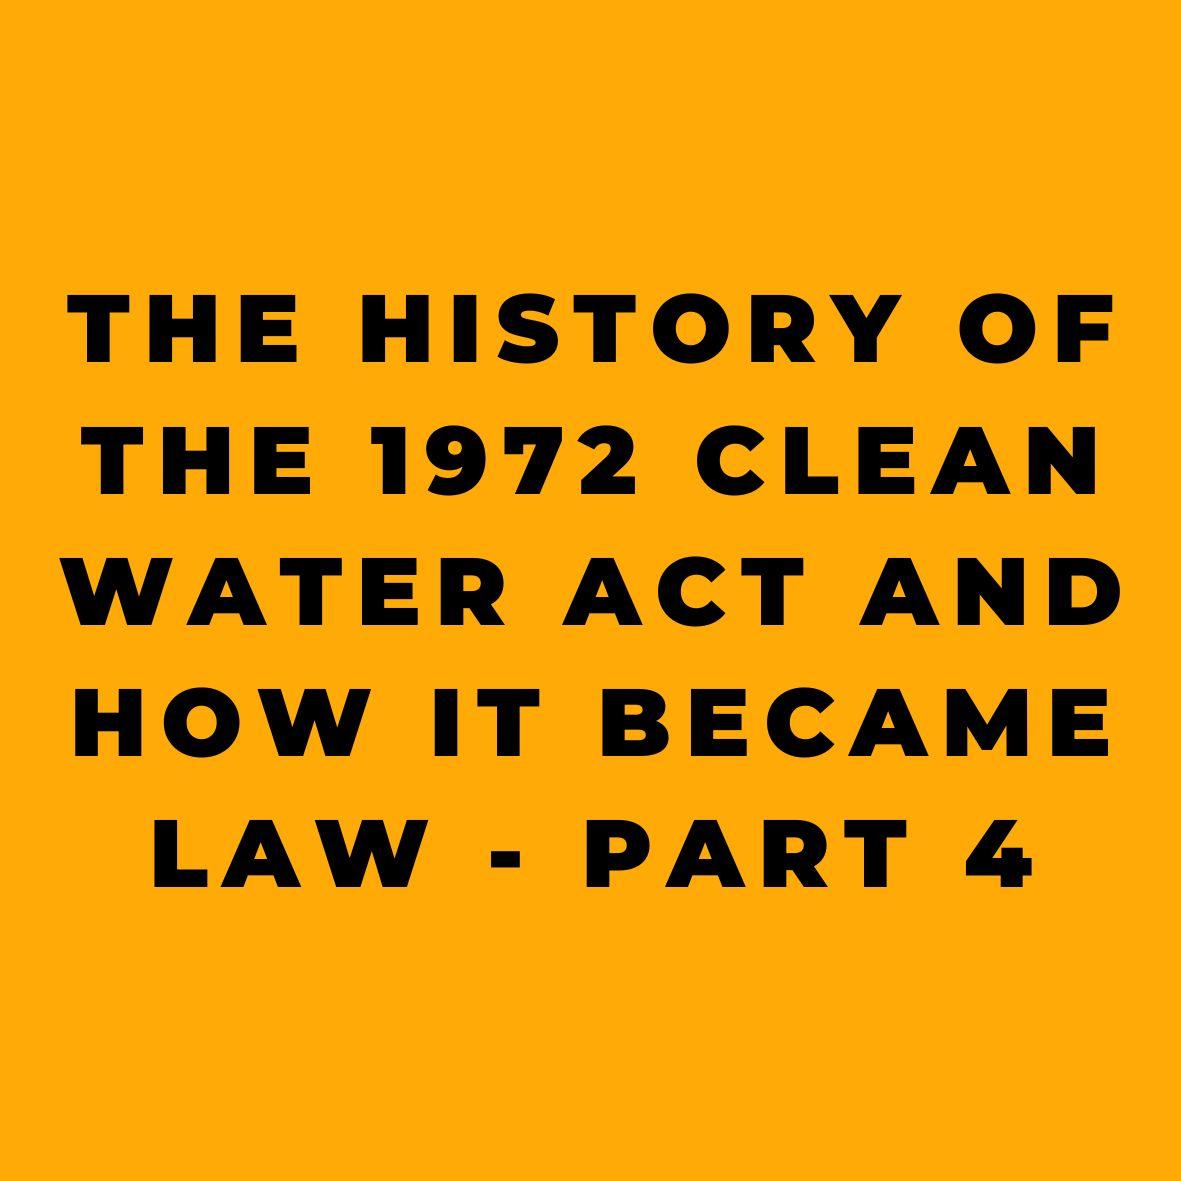 The History of the 1972 Clean Water Act And How it Became Law Part 4